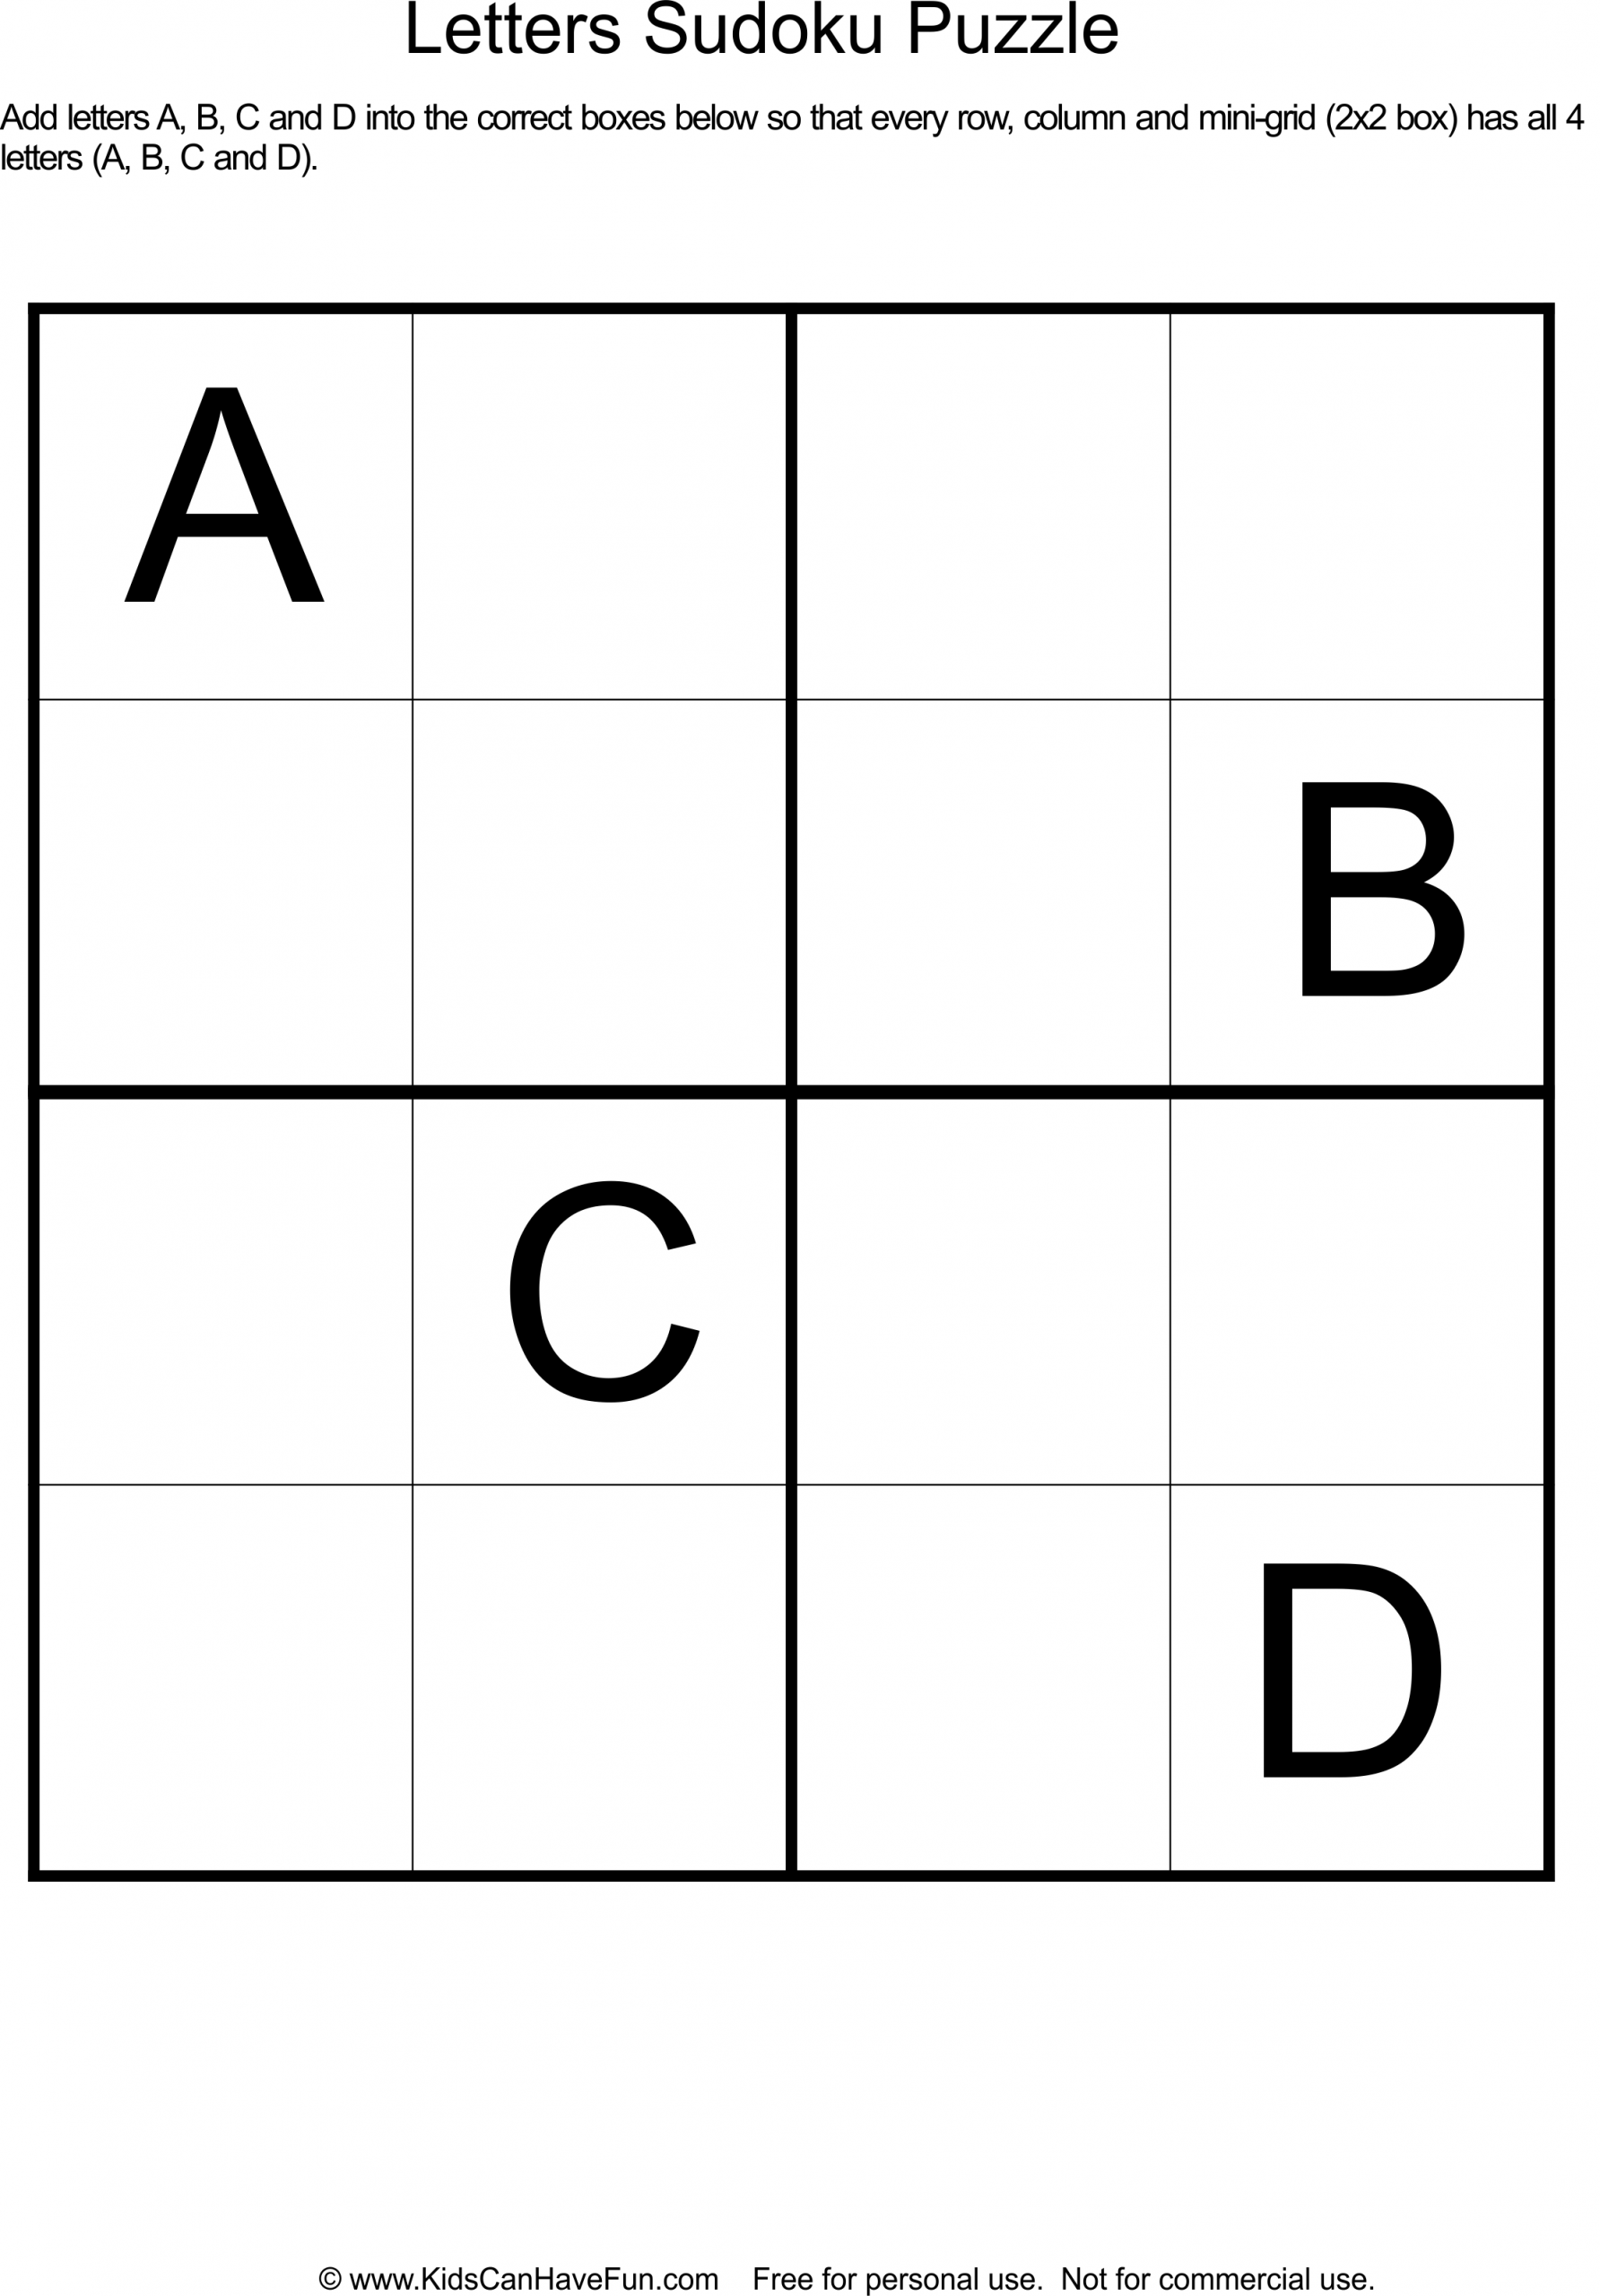 Sudoku Letters Puzzle For Kids Http://www.kidscanhavefun